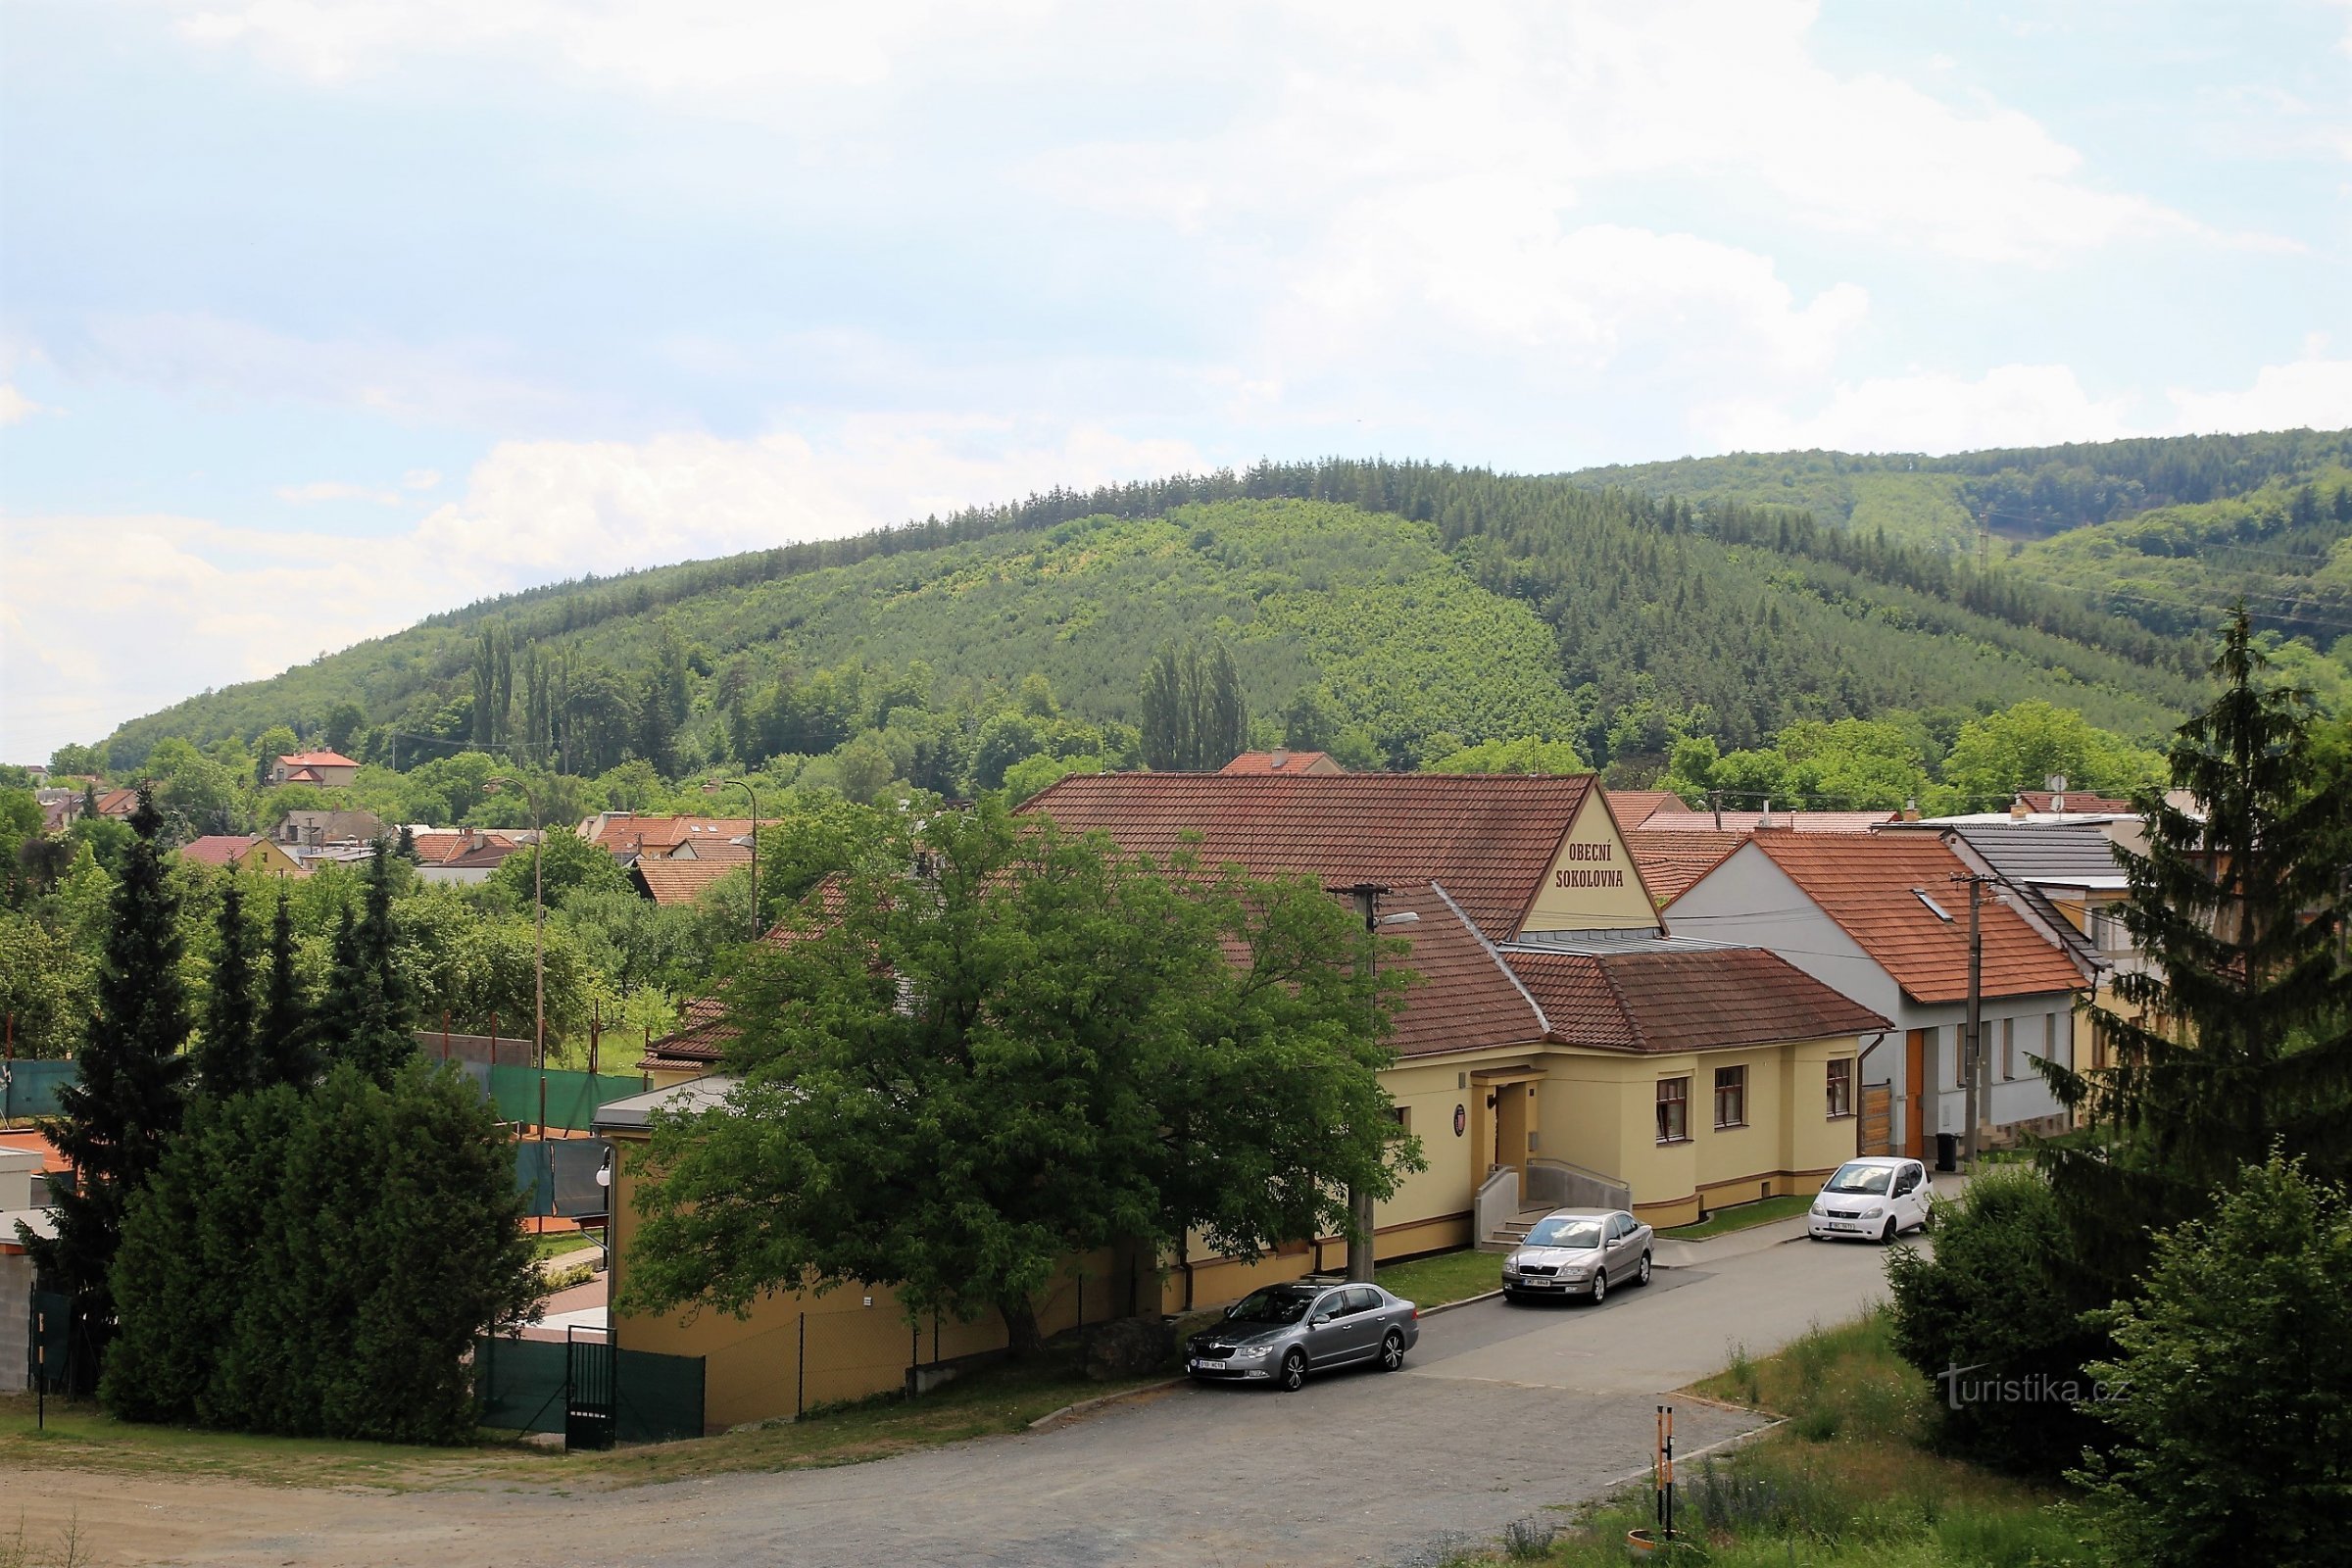 View of the village and the distinctive peak of Ostrá hora